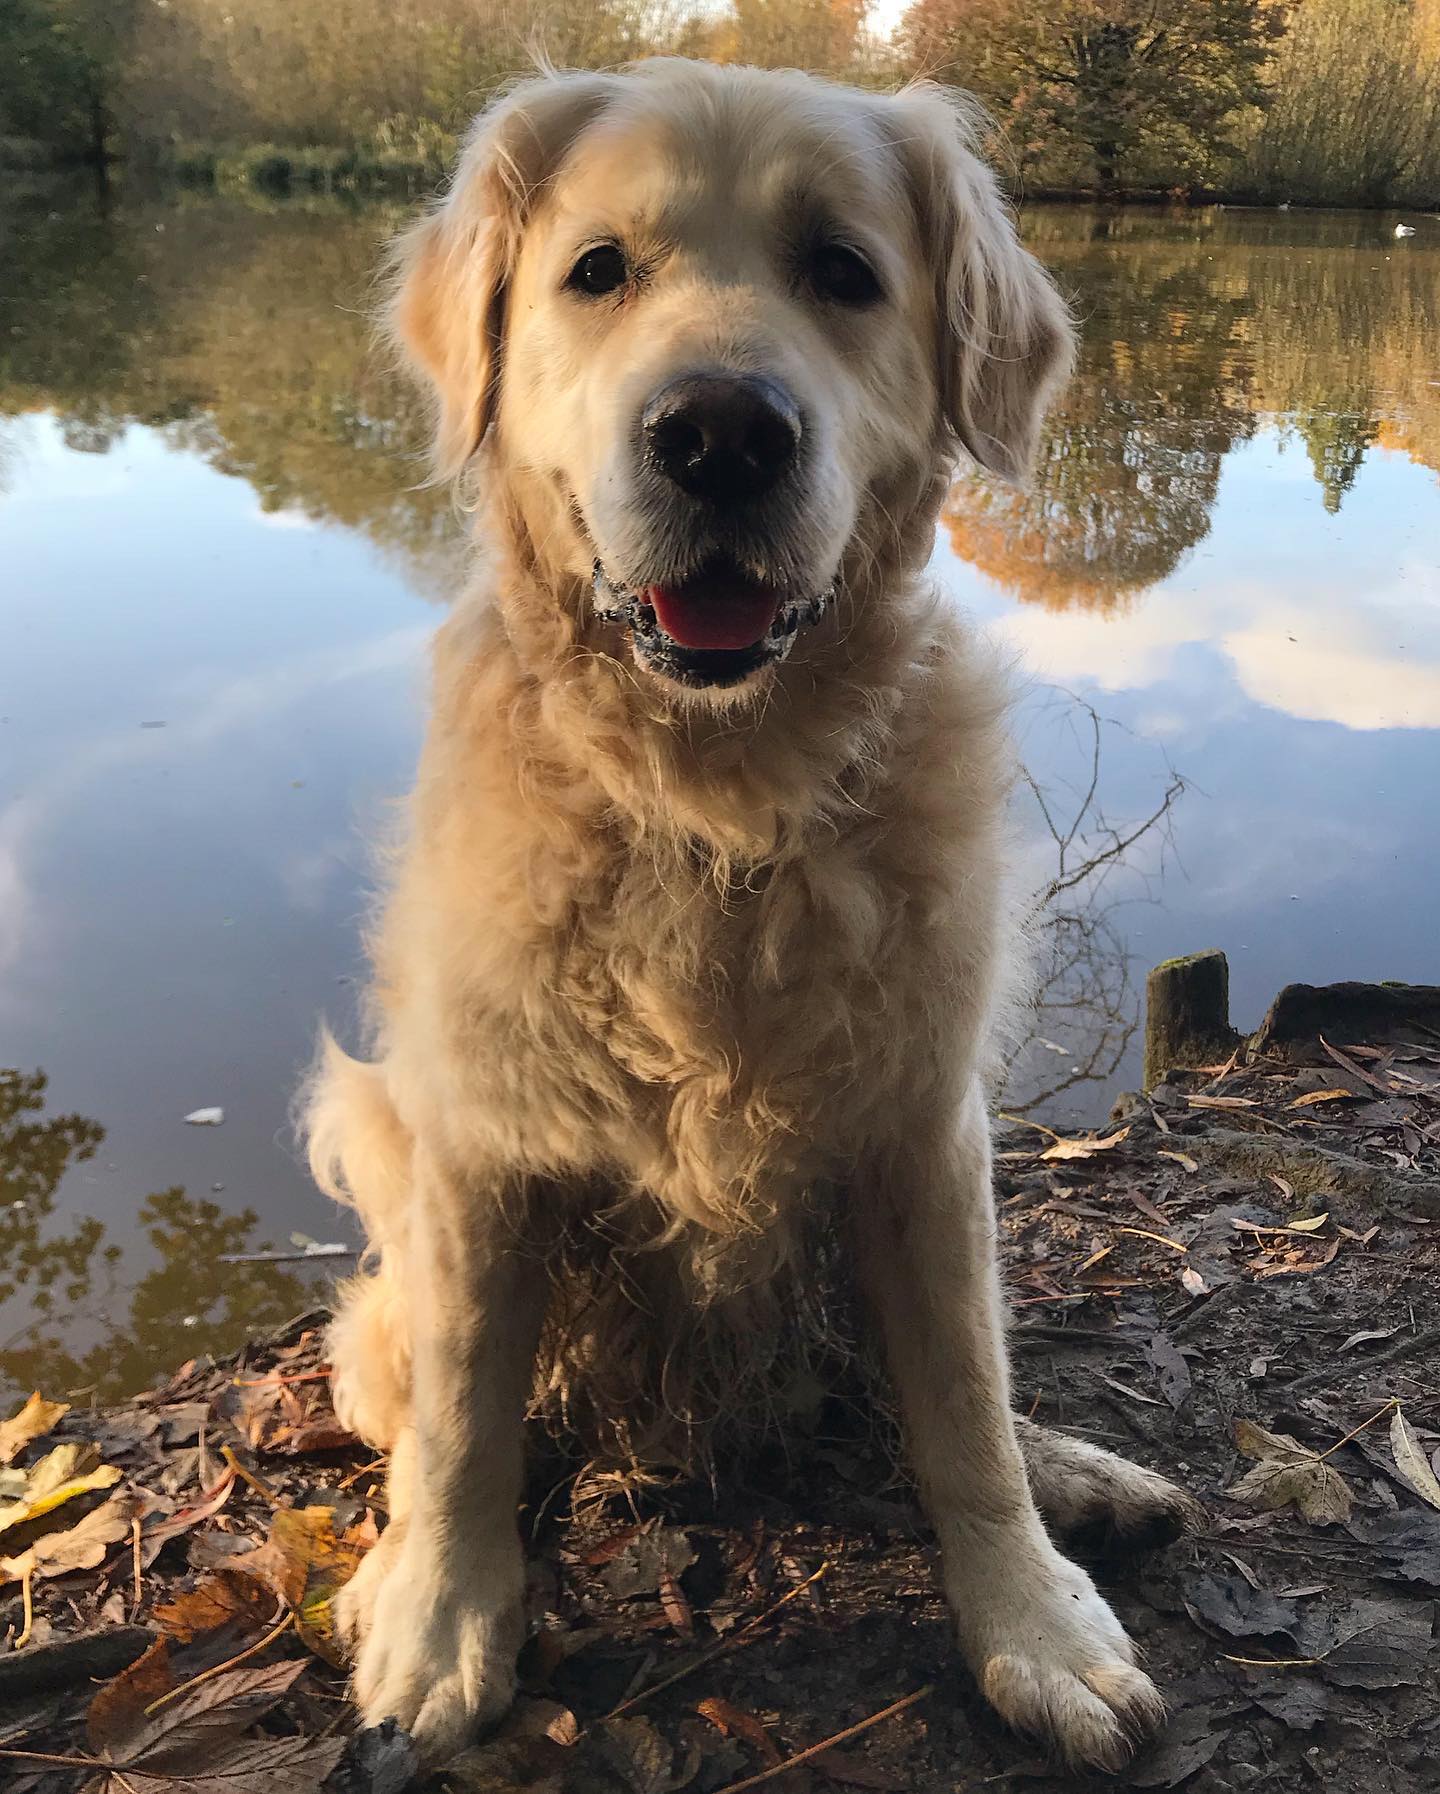 How to cool dogs down like this golden retriever dog by the lake